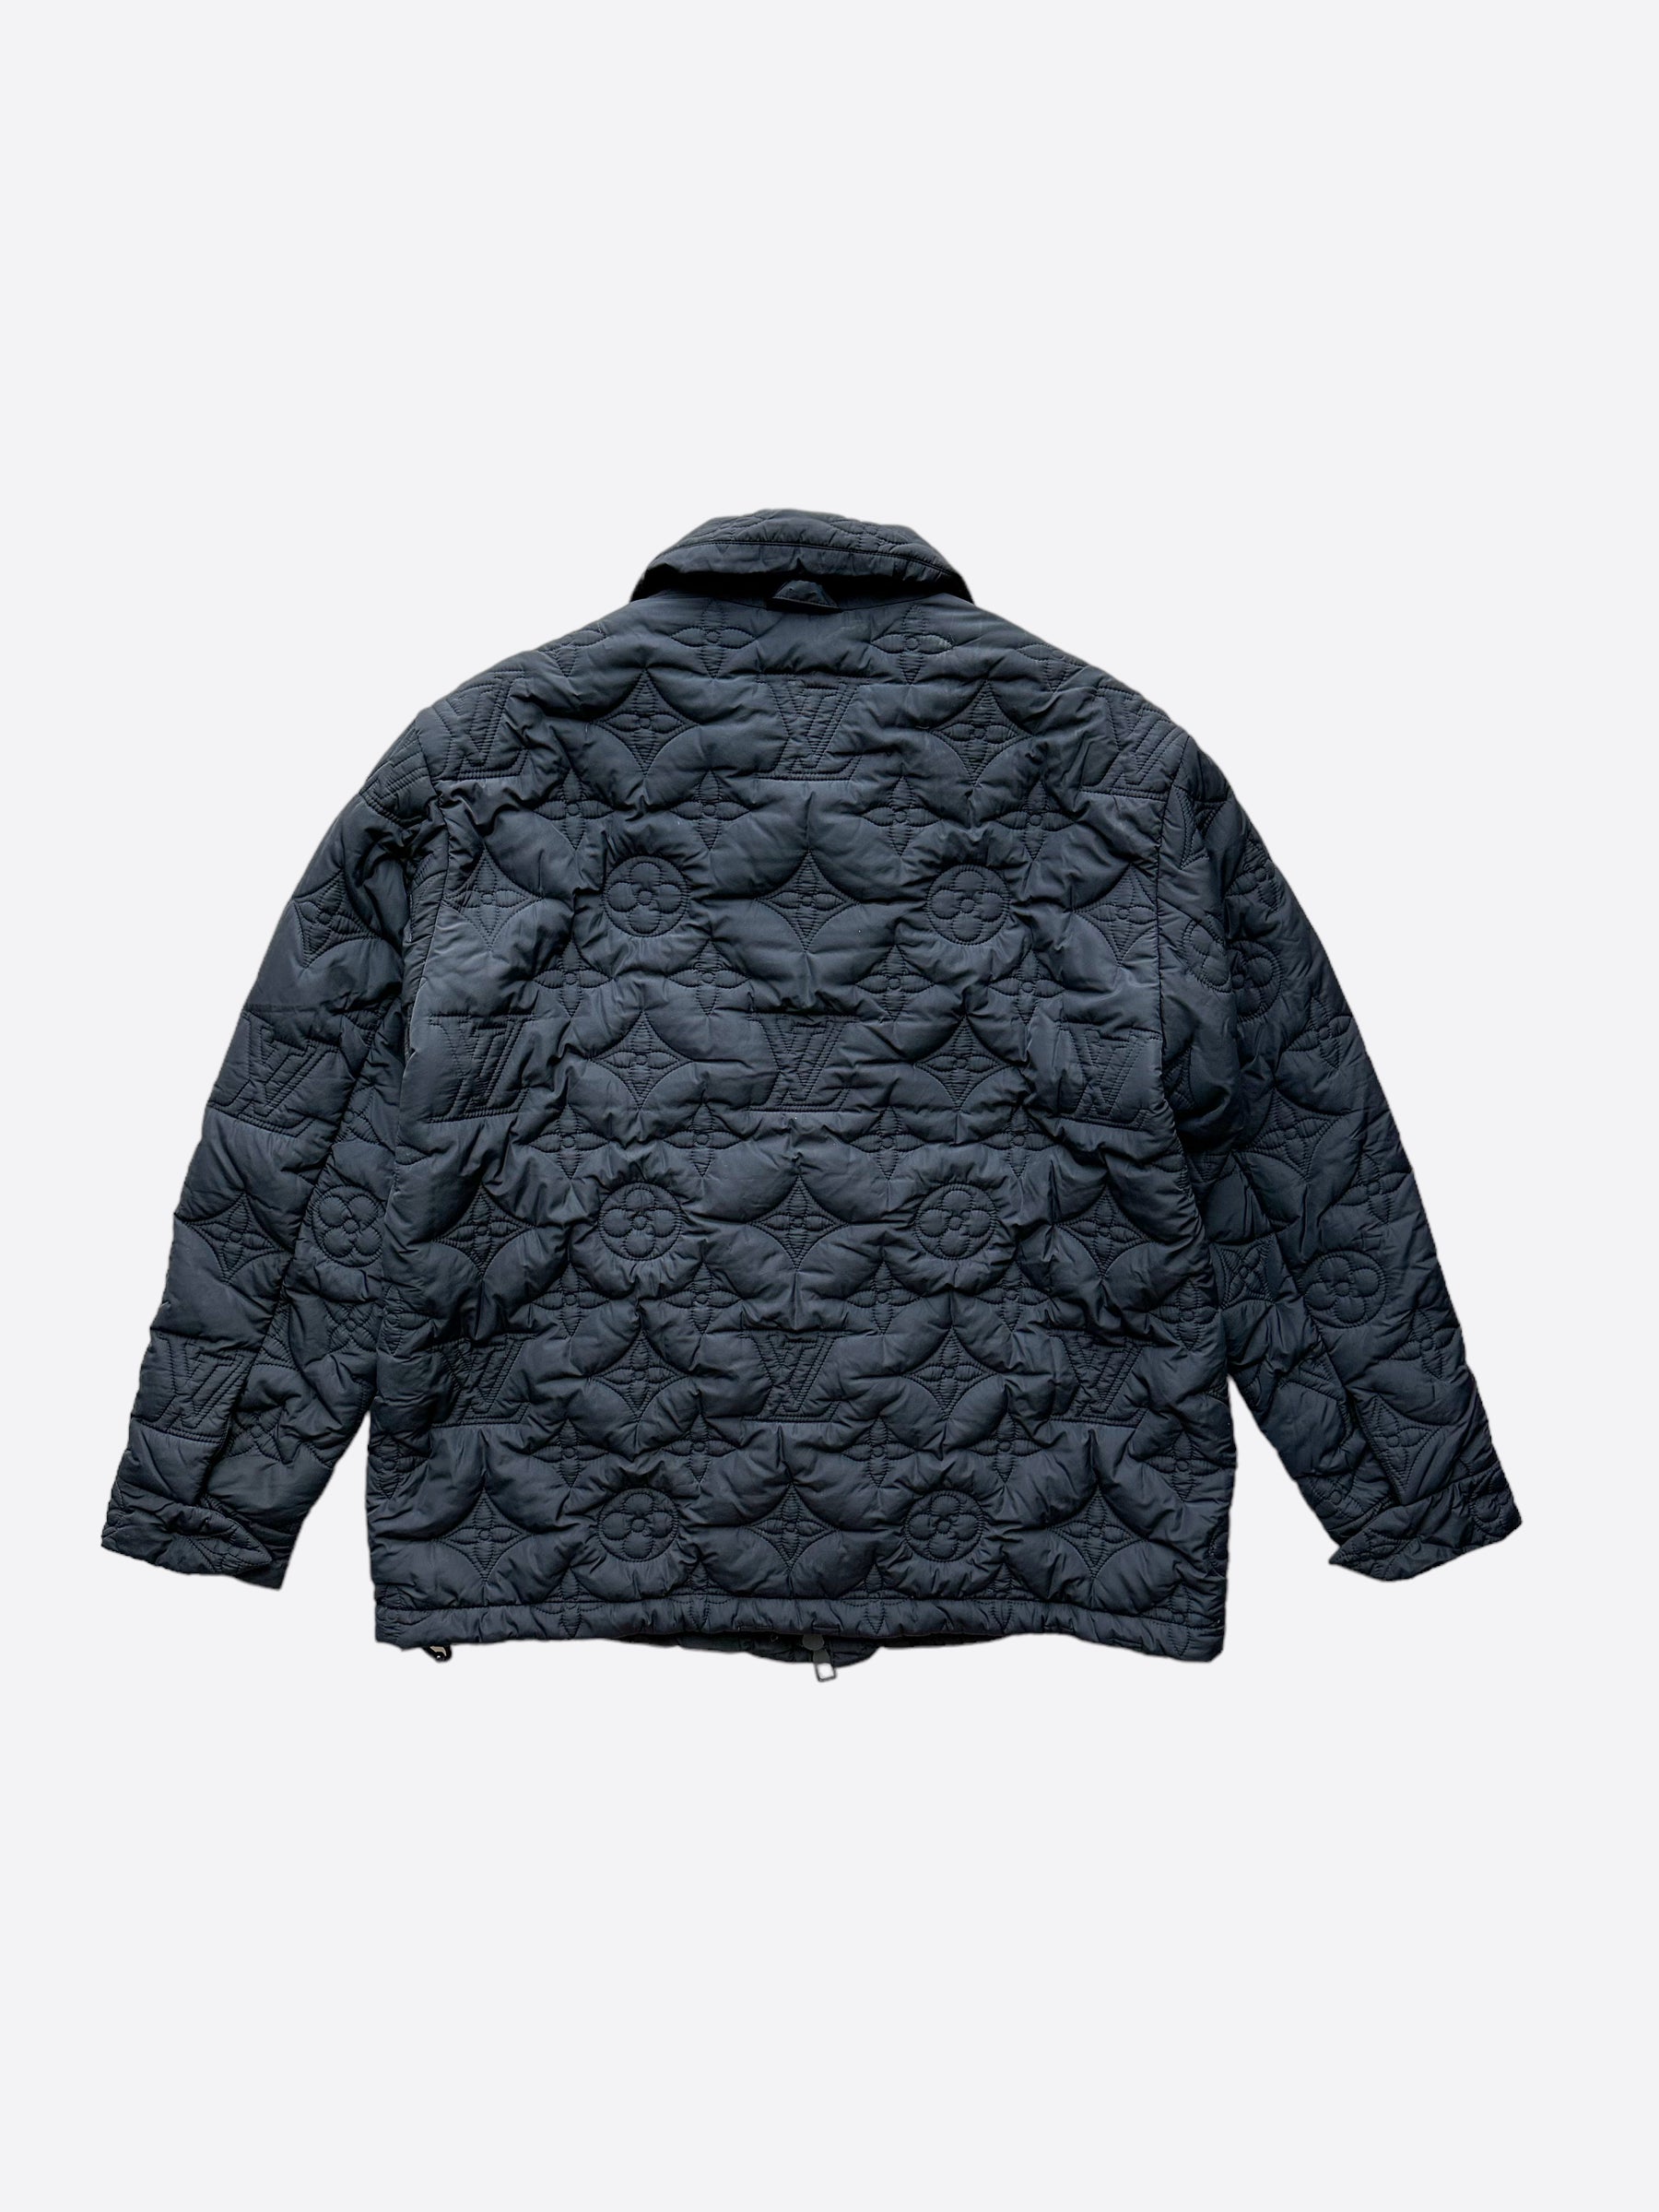 Louis Vuitton monogrammed two piece windbreaker and puffer jacket  Types  of fashion styles, Puff jacket outfit, Louis vuitton jacket